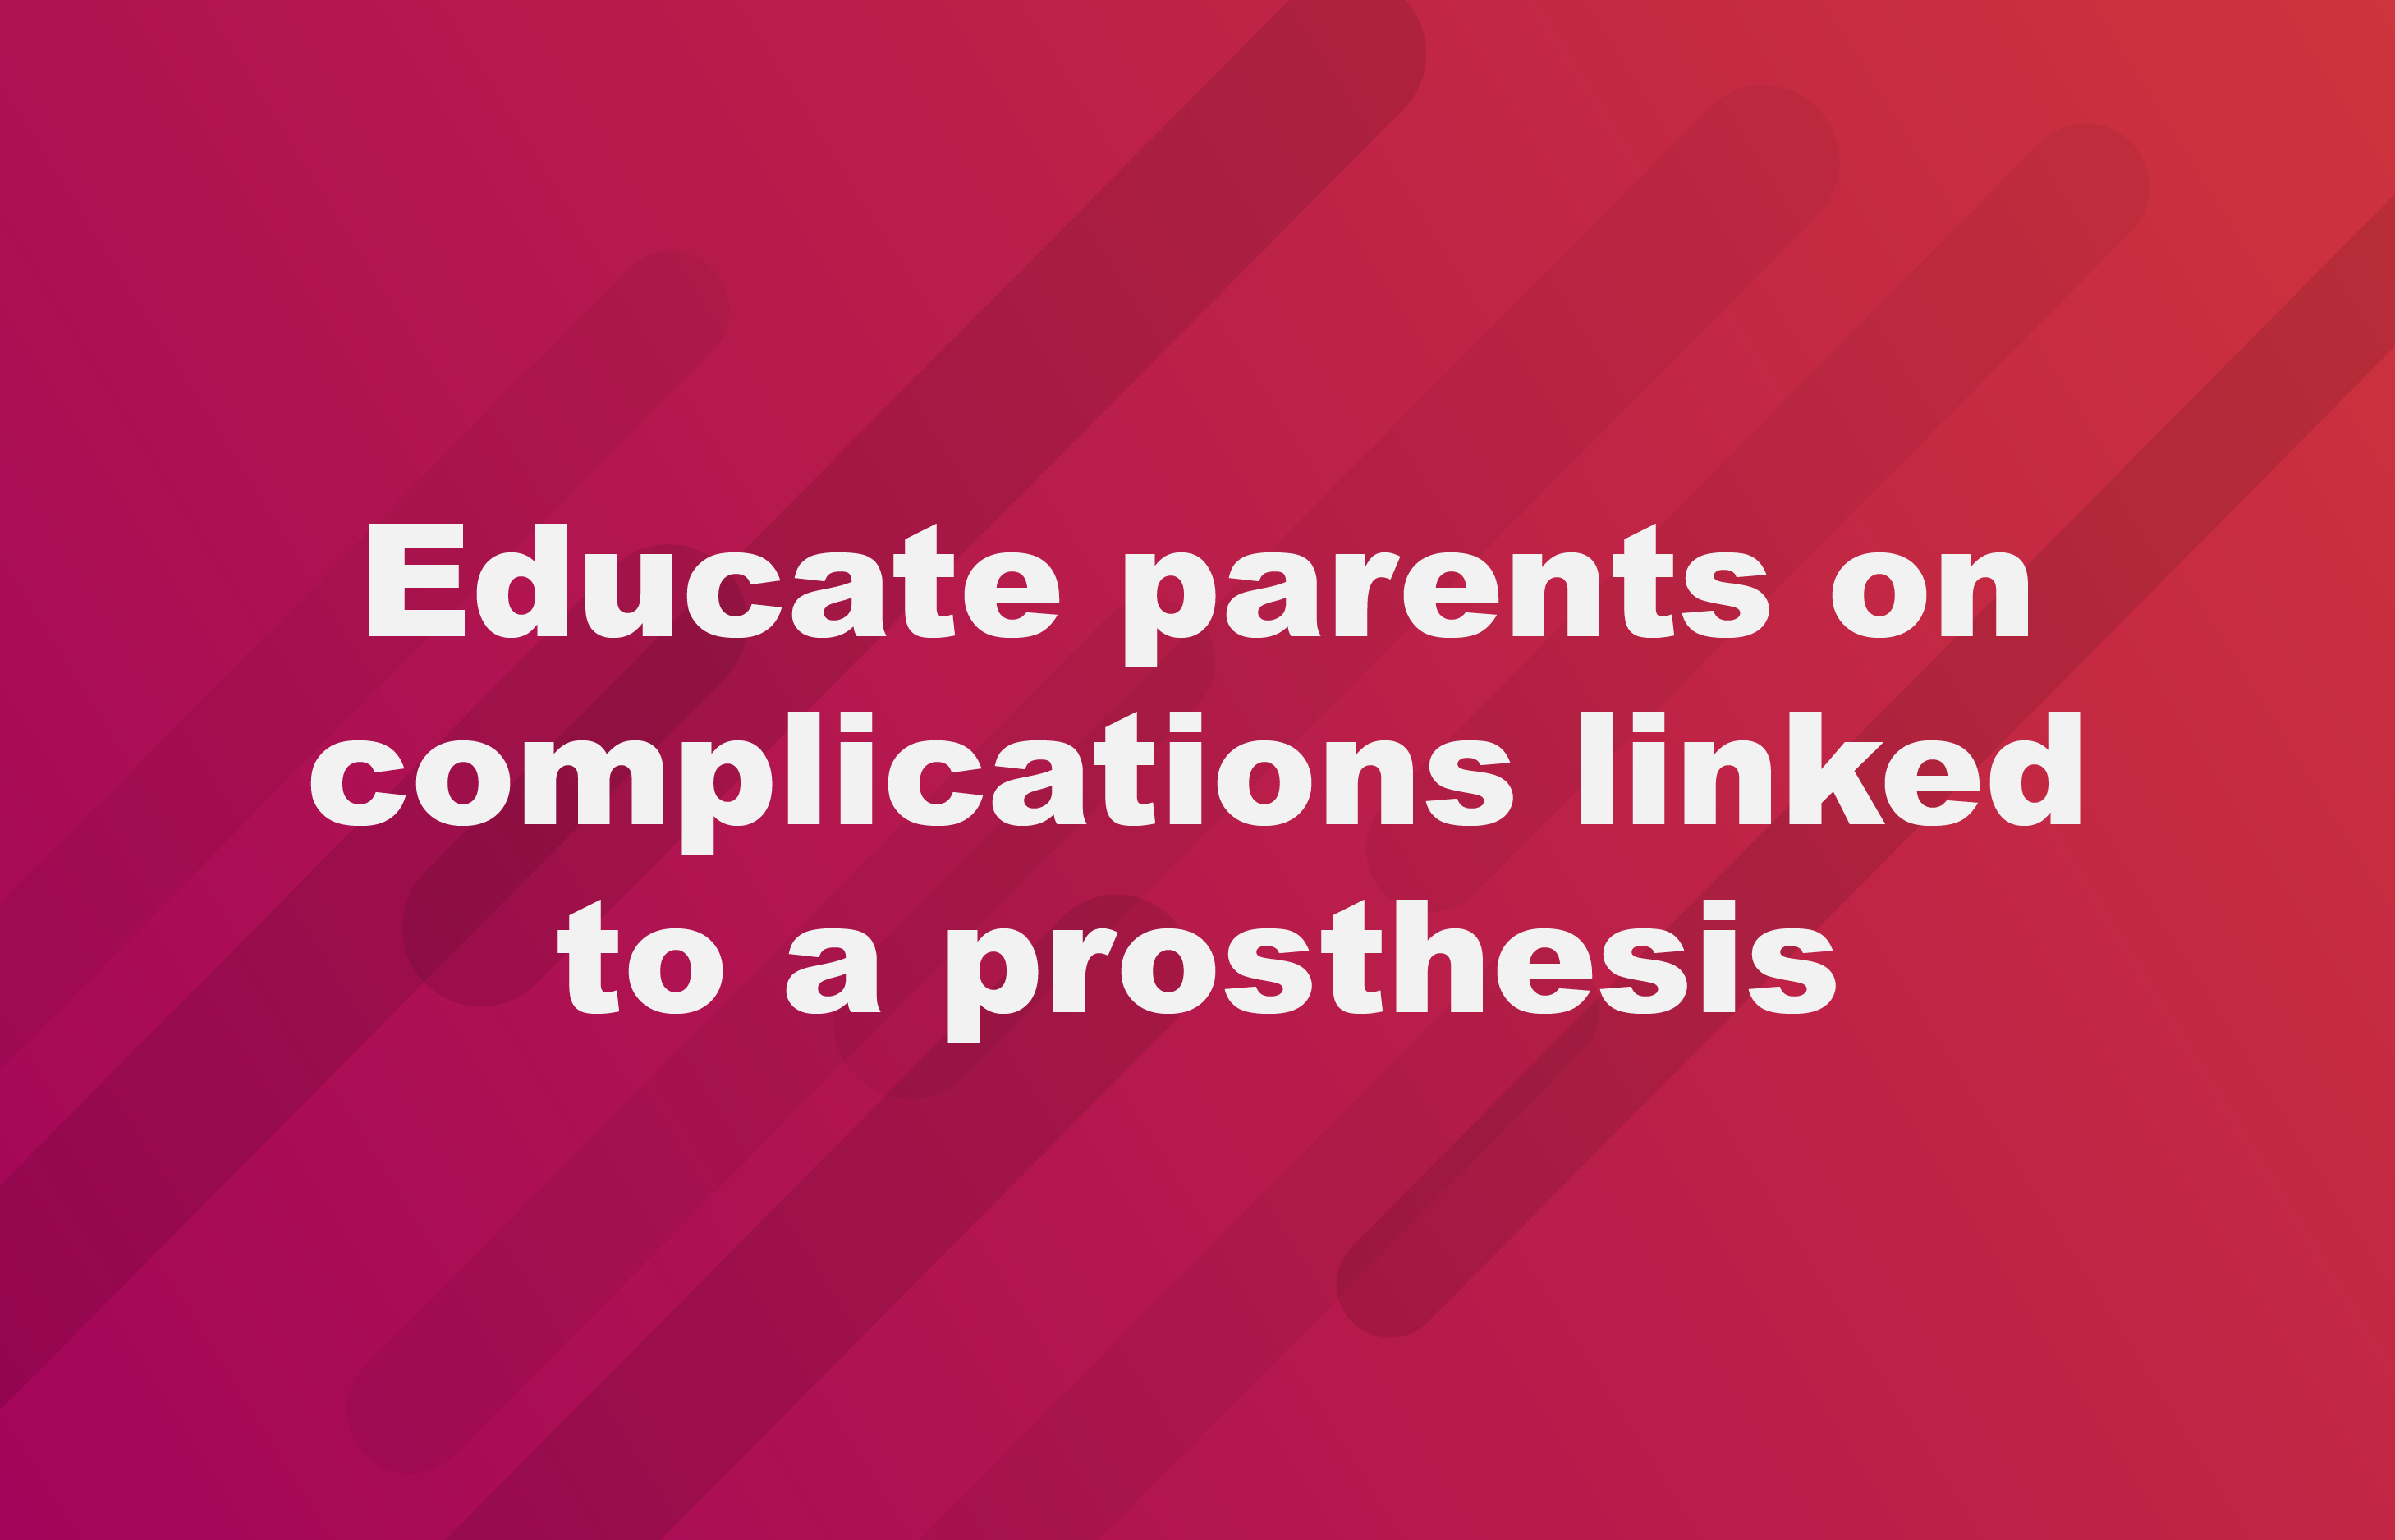 Educate parents on complications linked to a prosthesis